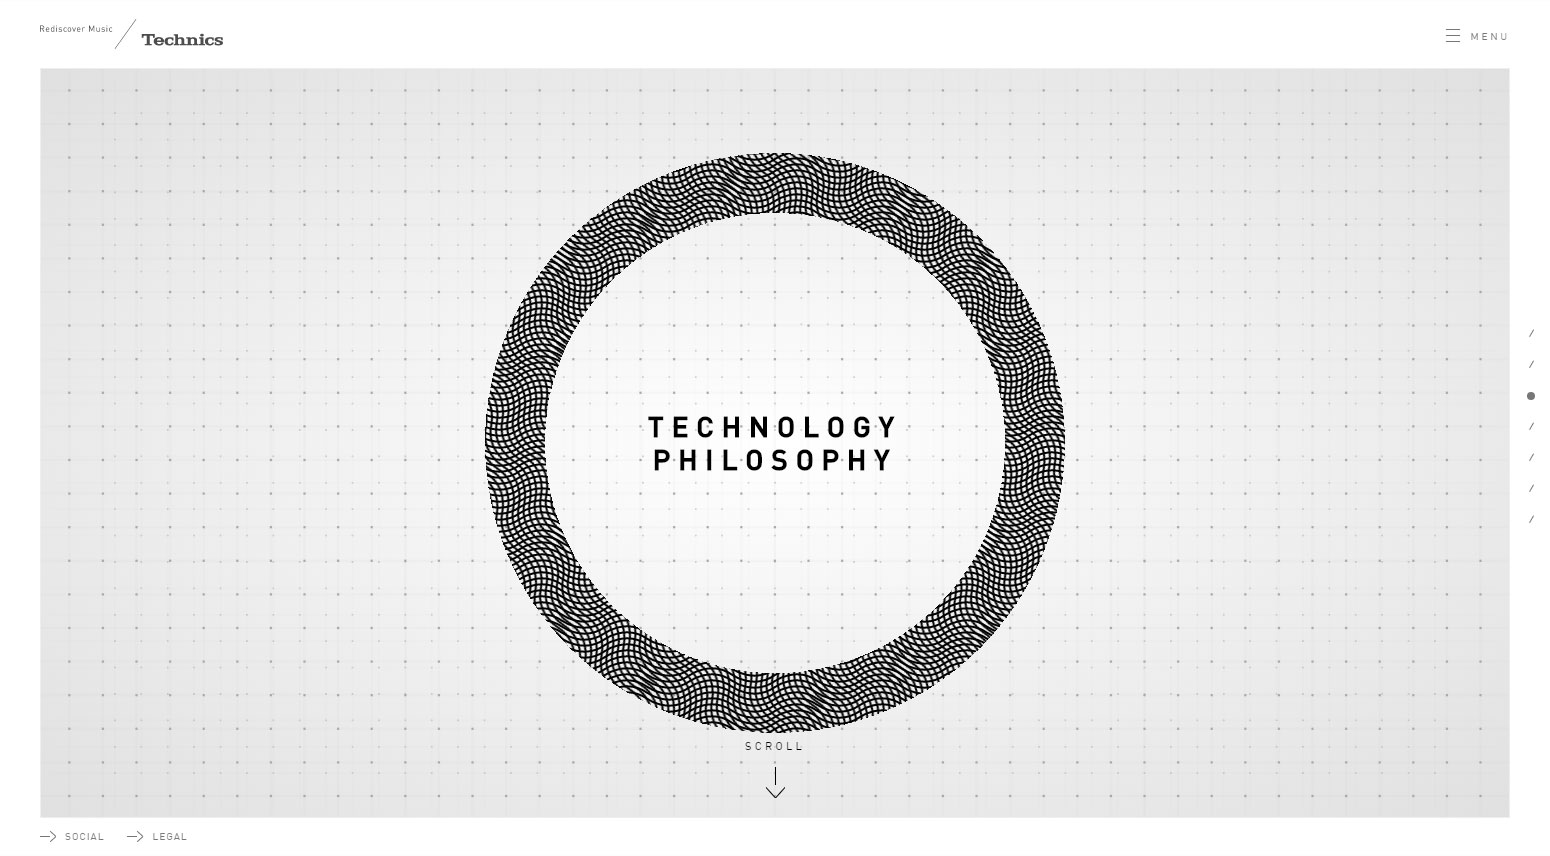 Technics global site - Website of the Day